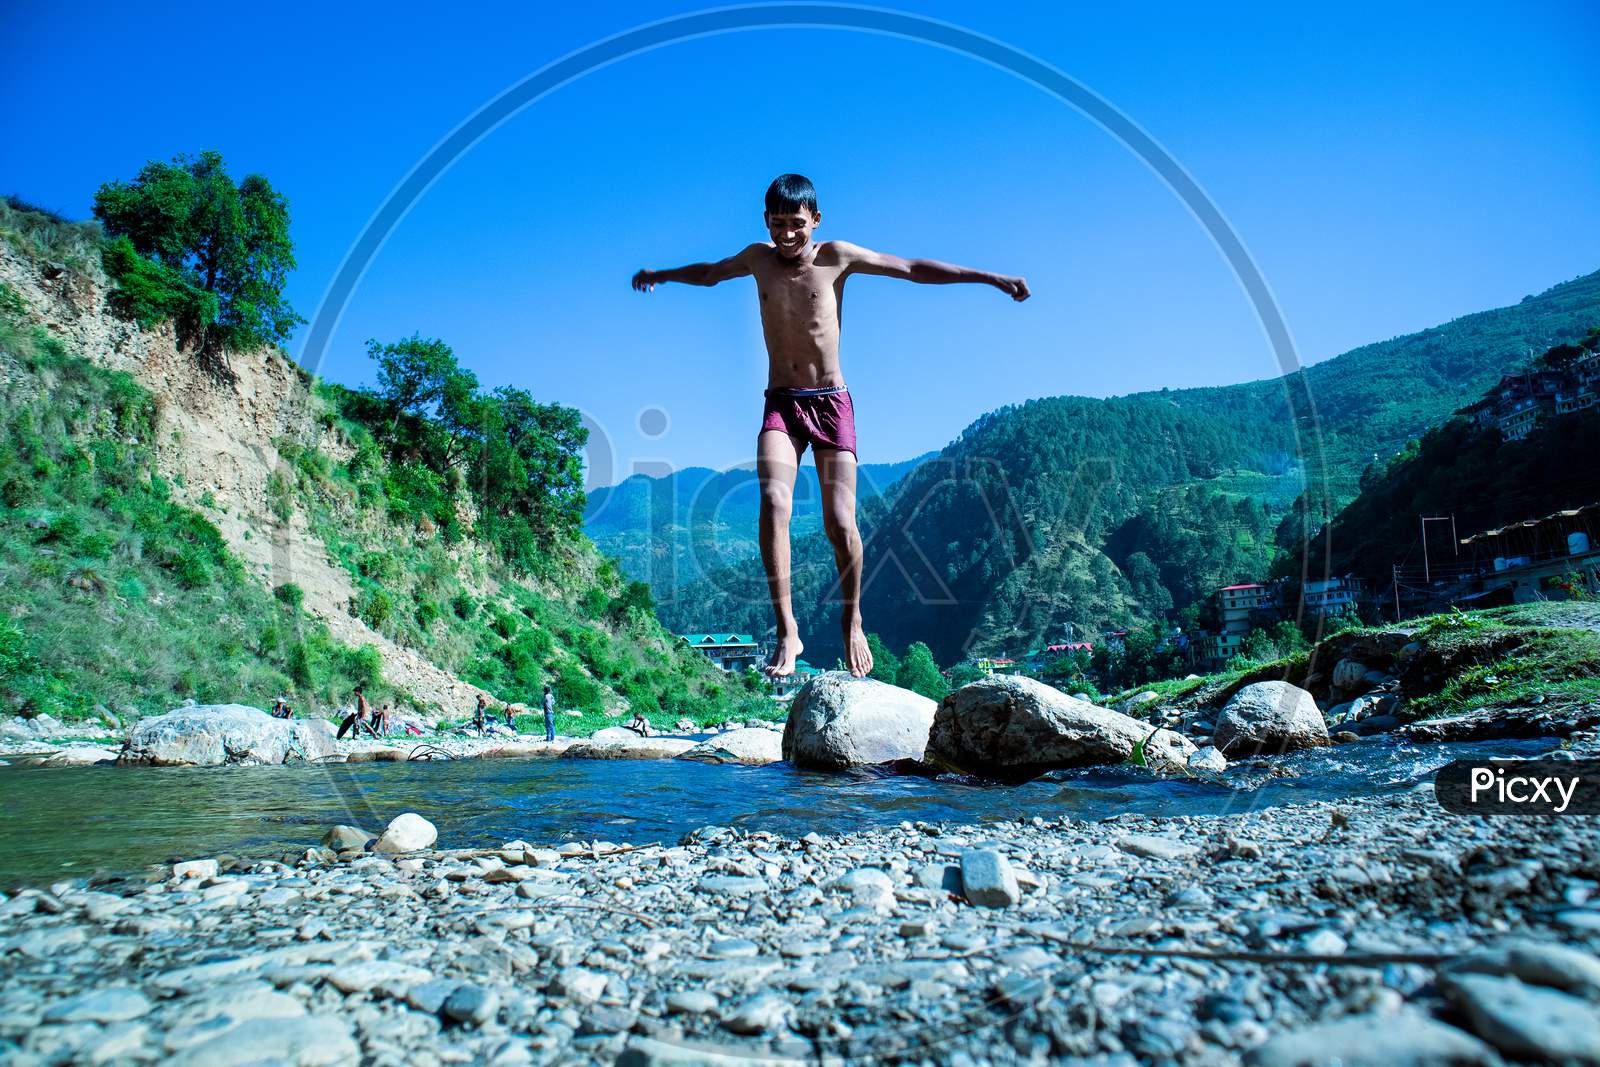 Nerwa, Himachal Pradesh, India - July 20Th, 2019: Young Boy Jumping Into The River Water With Beautiful Mountains Hills Covered With Trees In The Background,